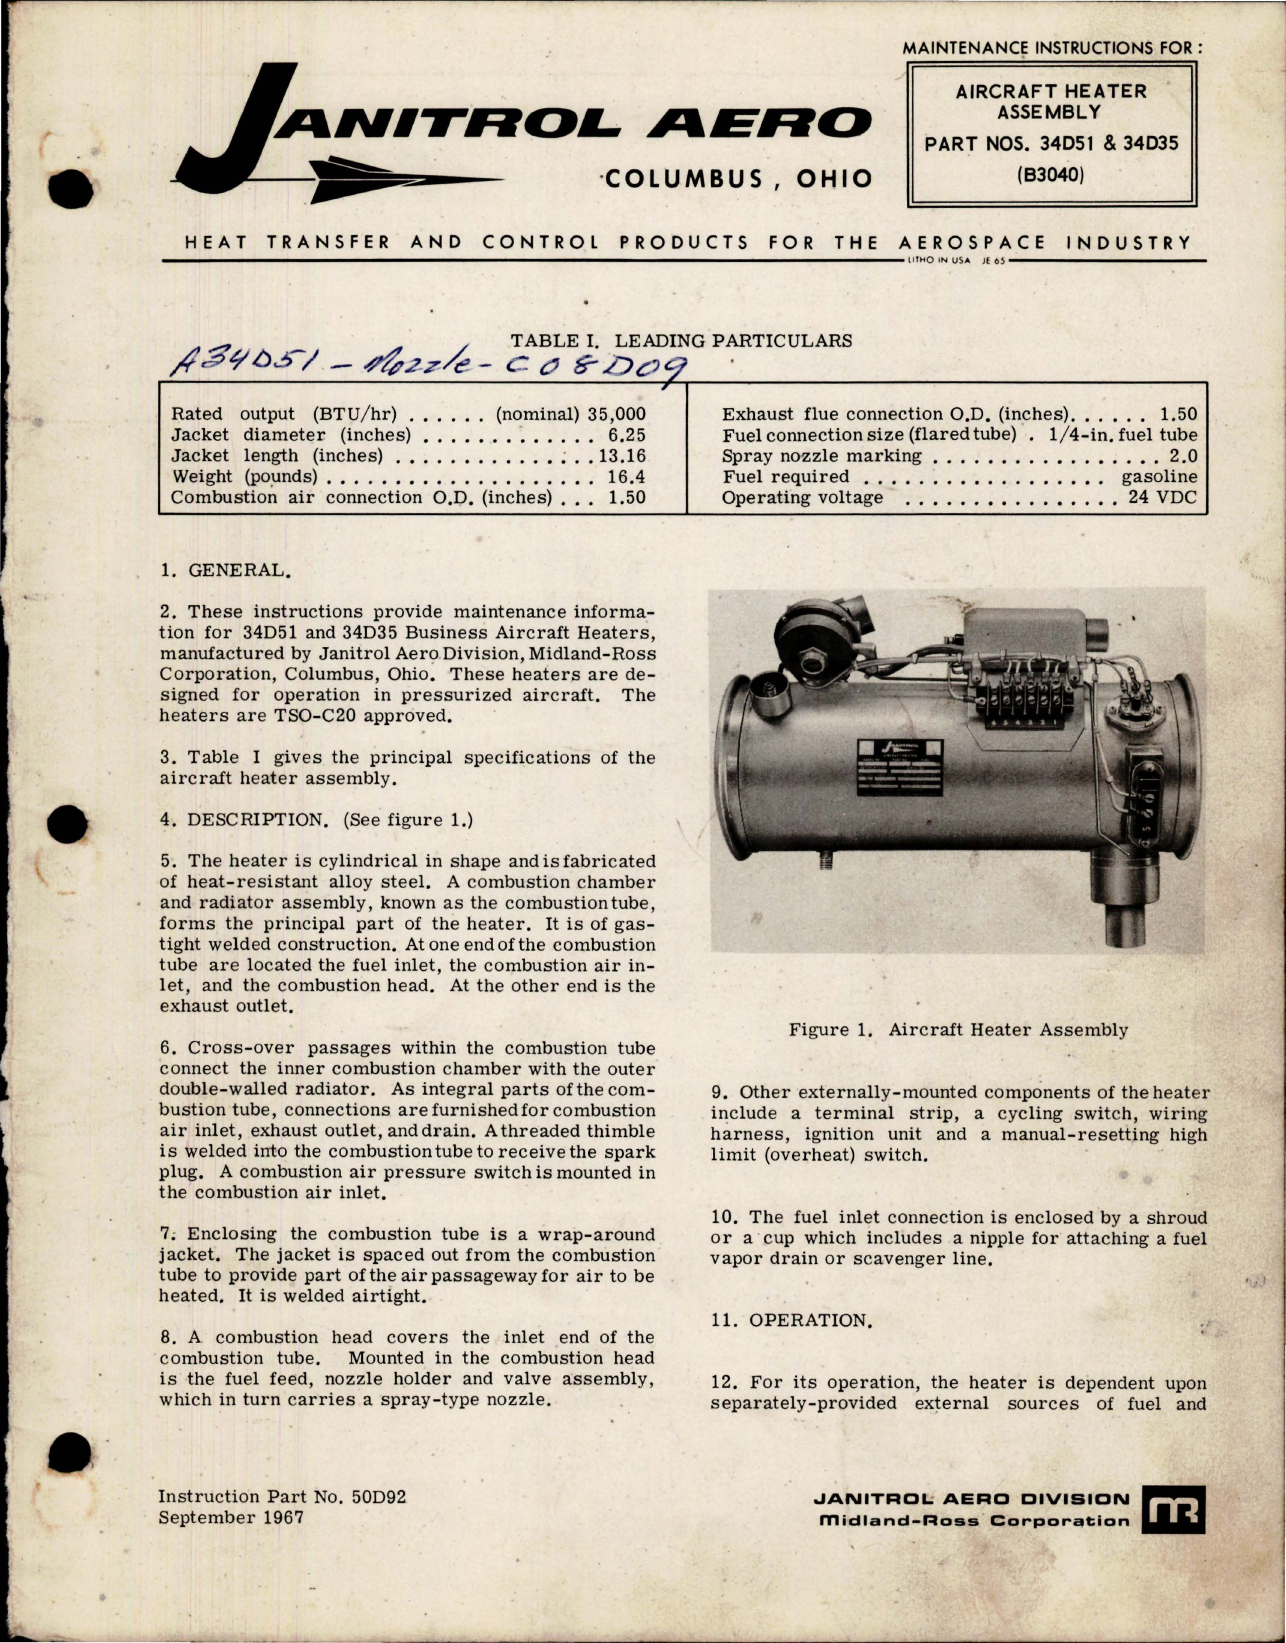 Sample page 1 from AirCorps Library document: Maintenance Instructions for Aircraft Heater Assembly - Part 34D51 and 34D35 - B3040 